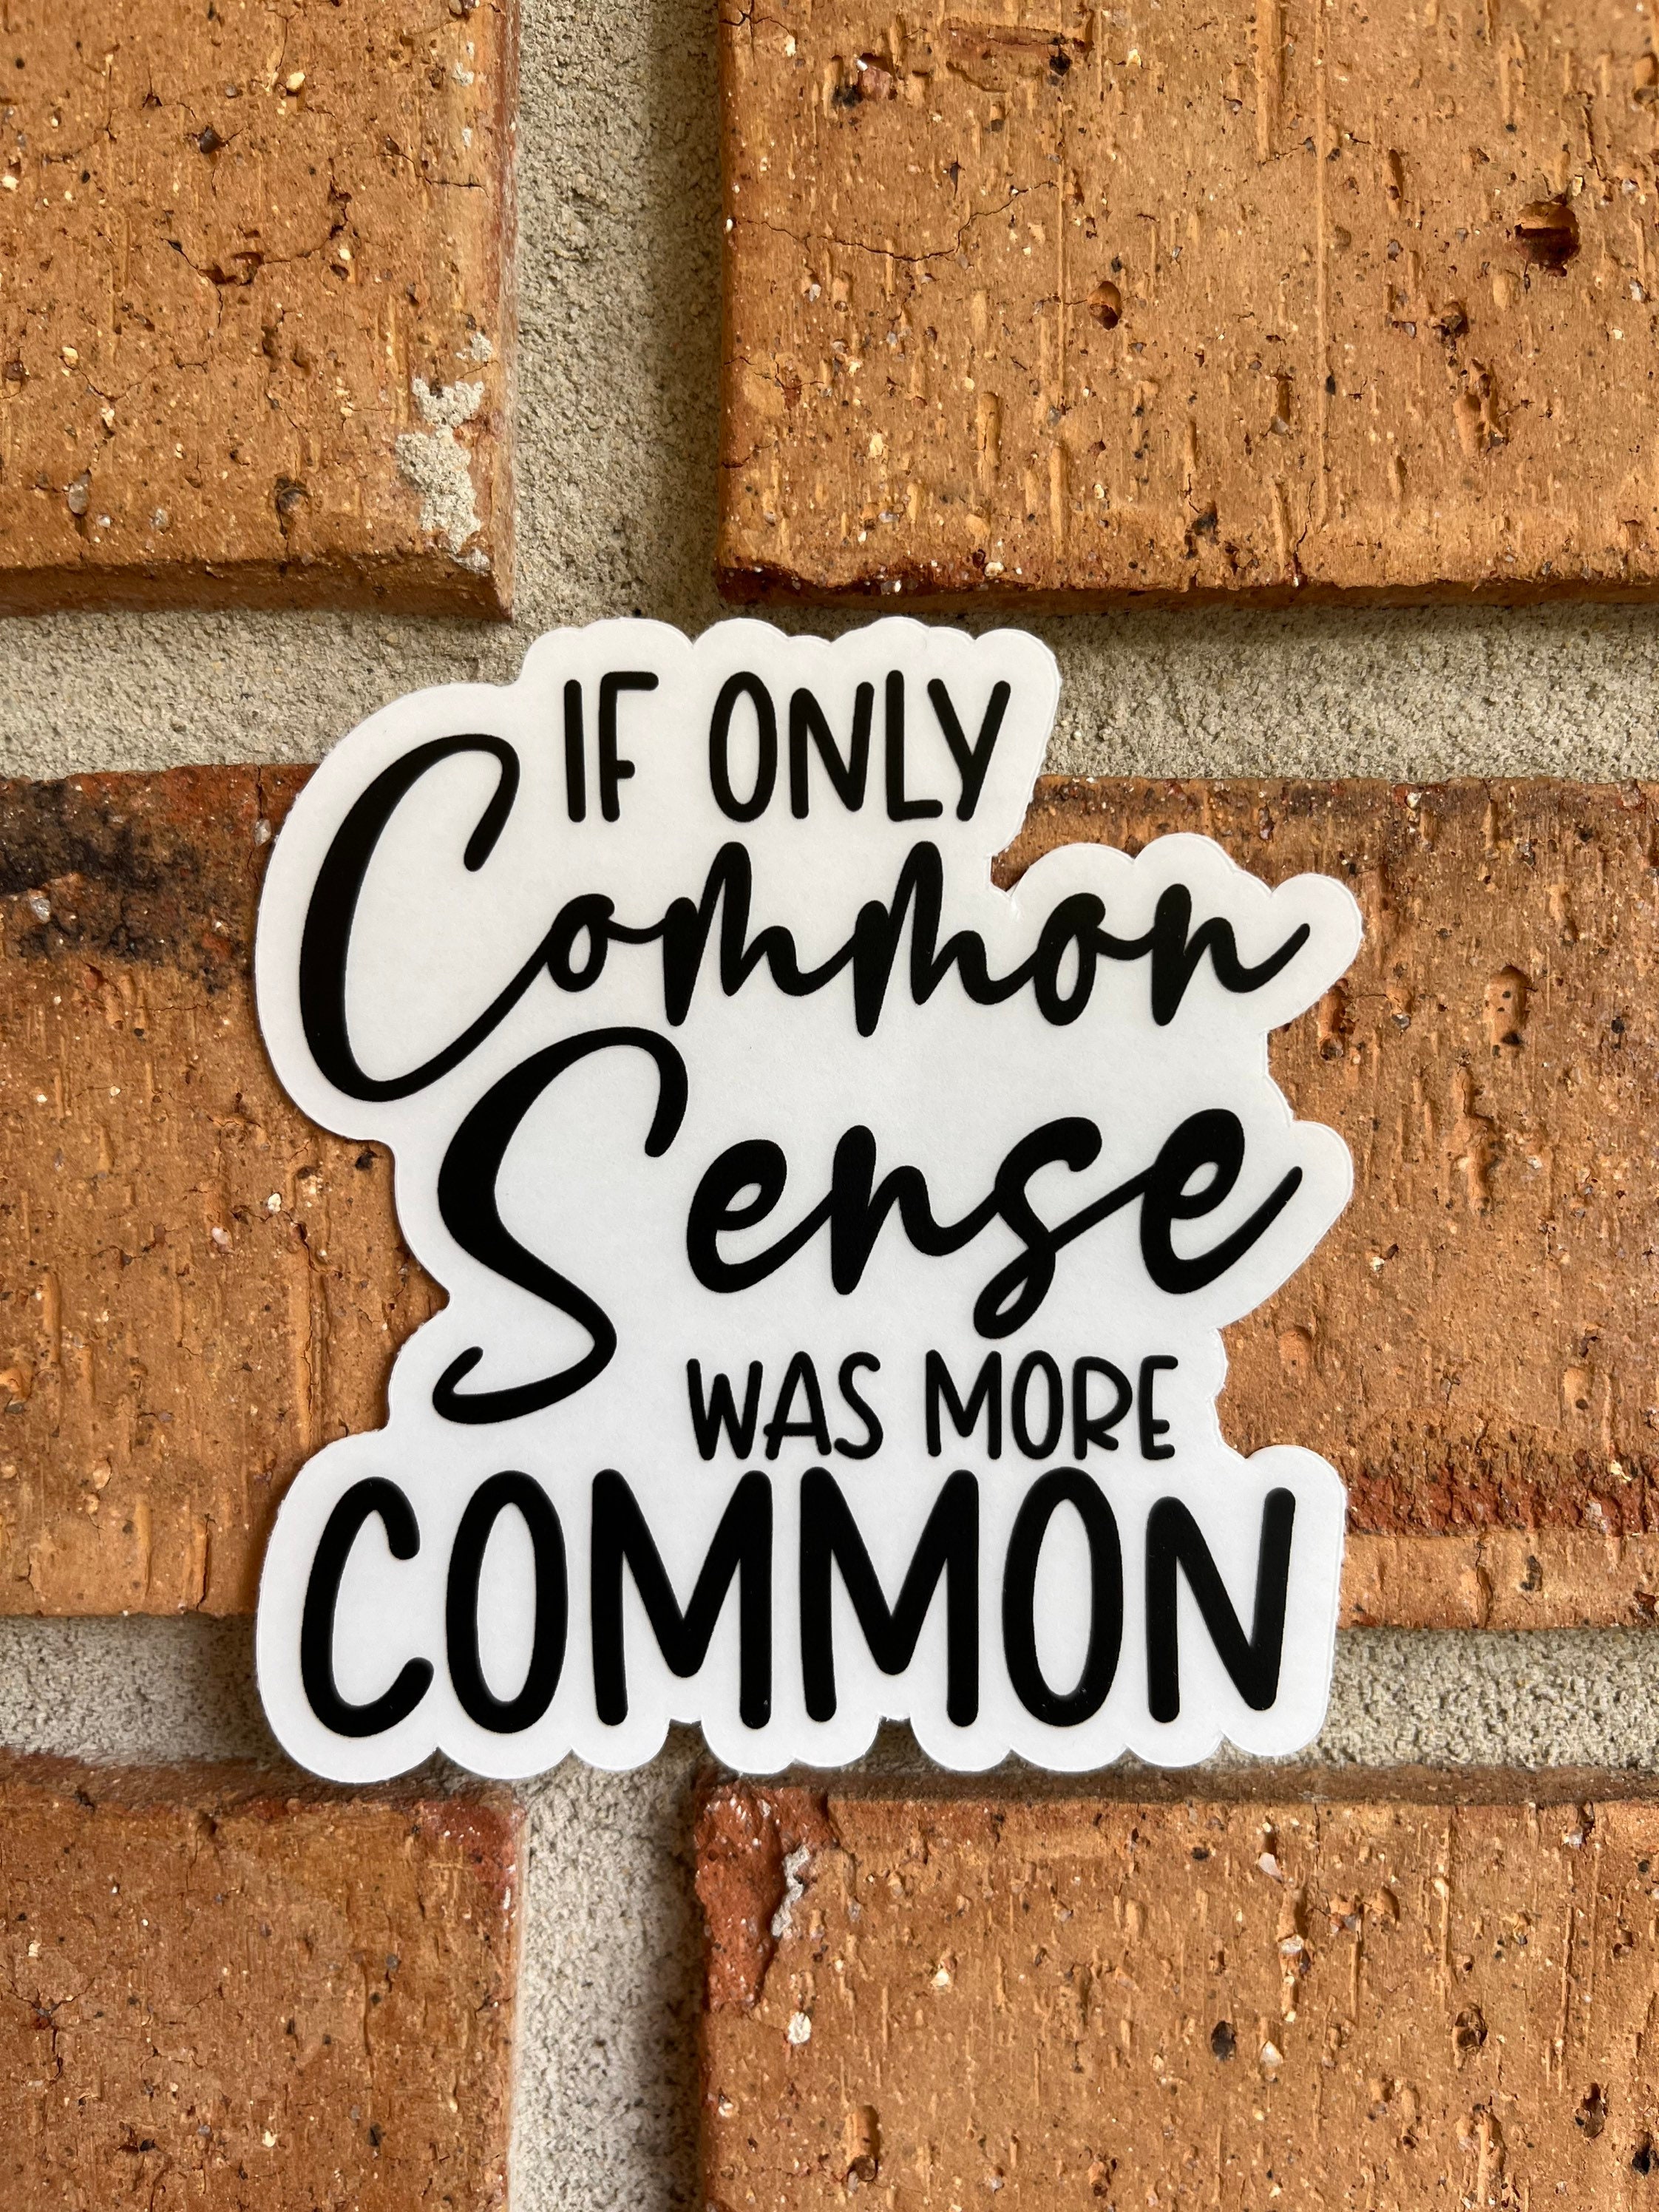 If only common sense was more common vinyl sticker, funny stickers,  motivational laptop stickers, water bottle stickers, water bottle decals